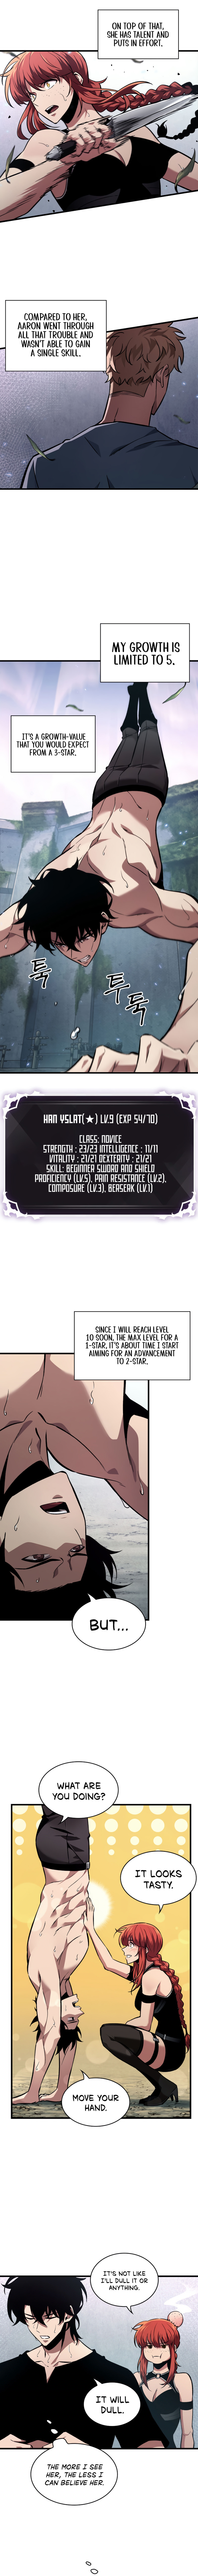 Pick Me Up - Chapter 13 Page 4